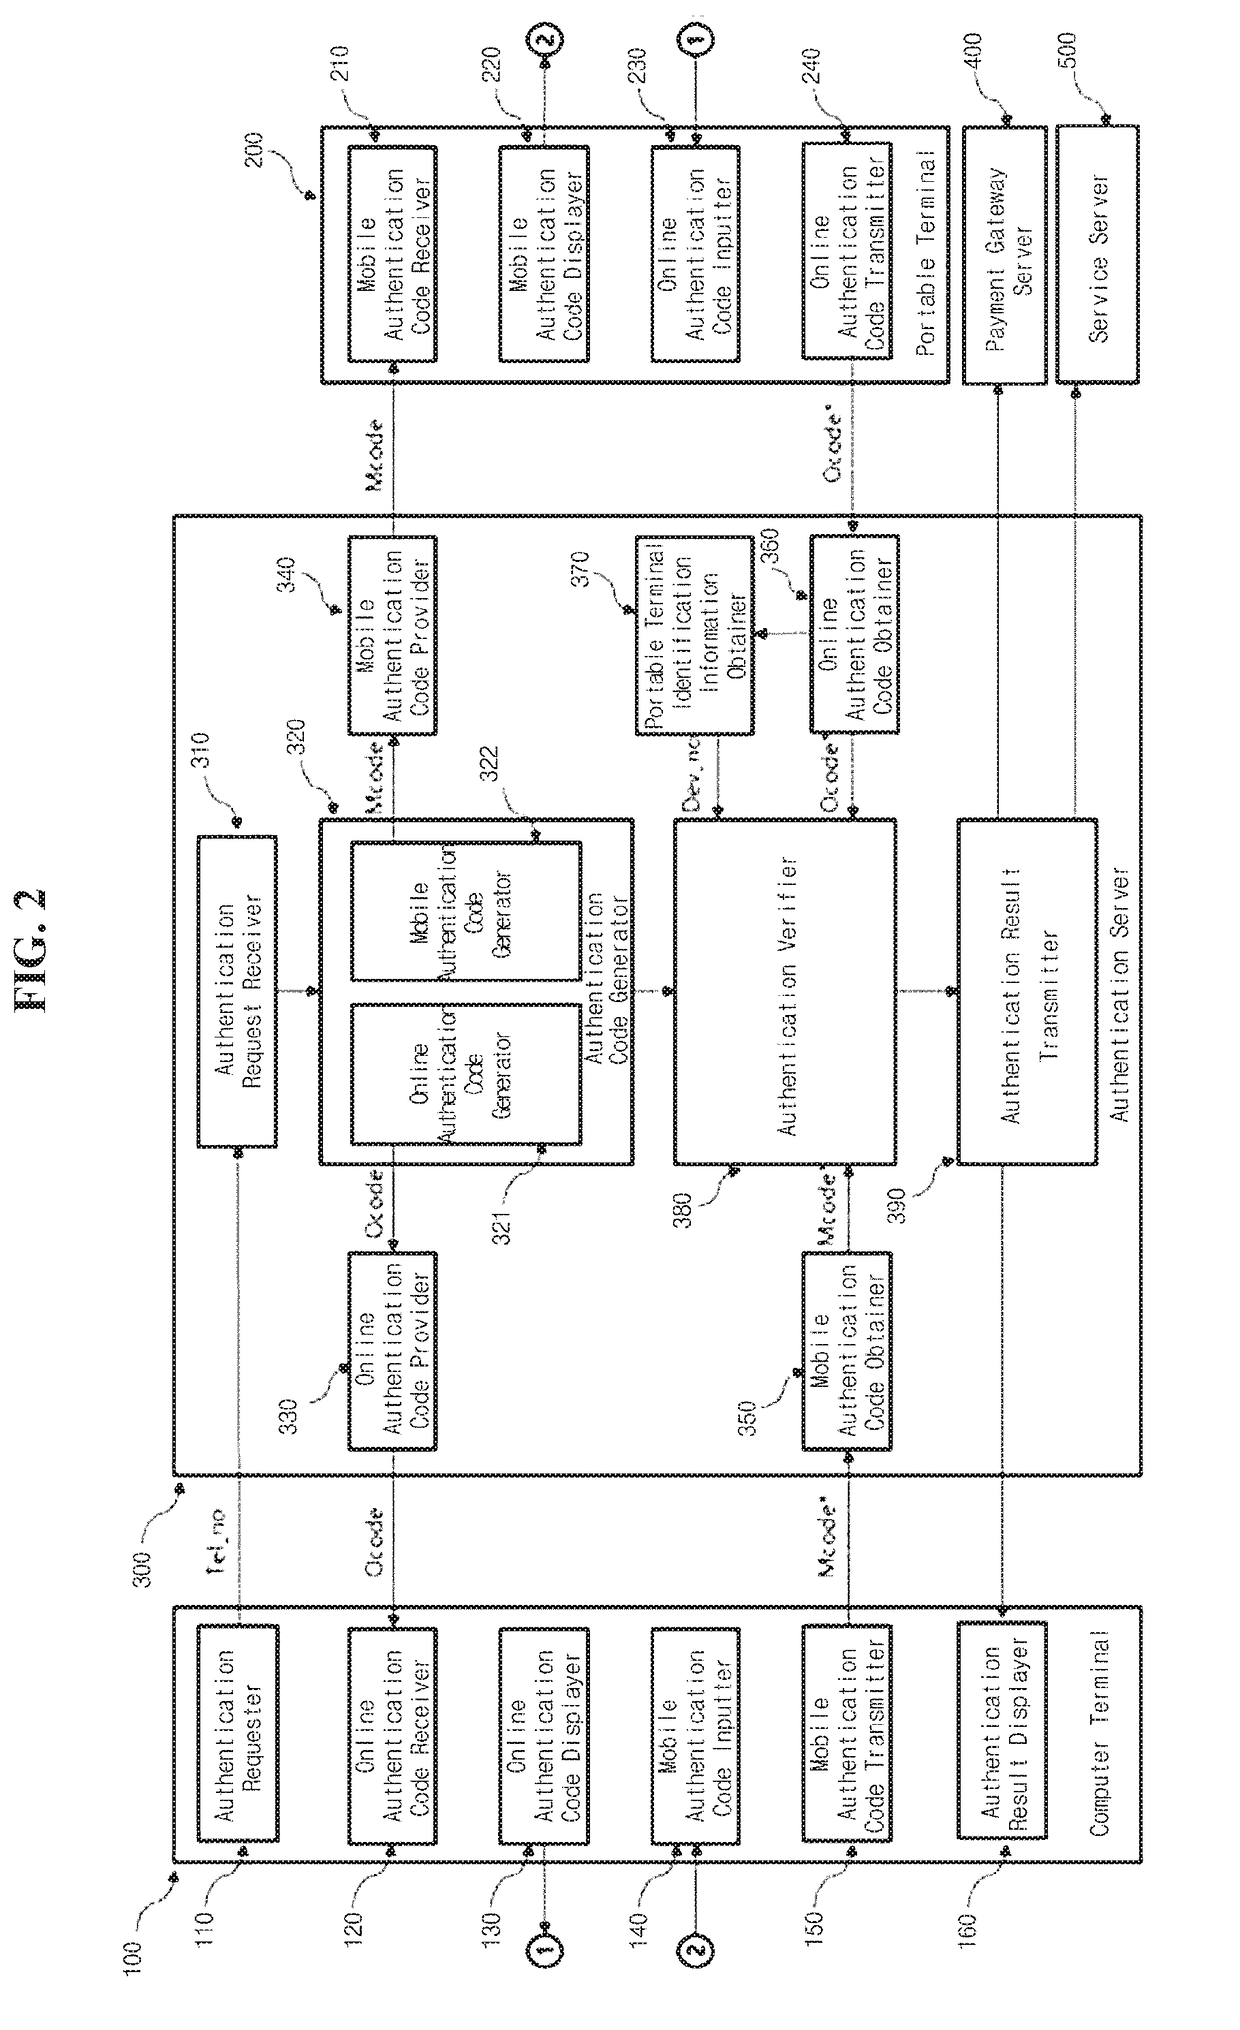 System and method for mobile cross-authentication